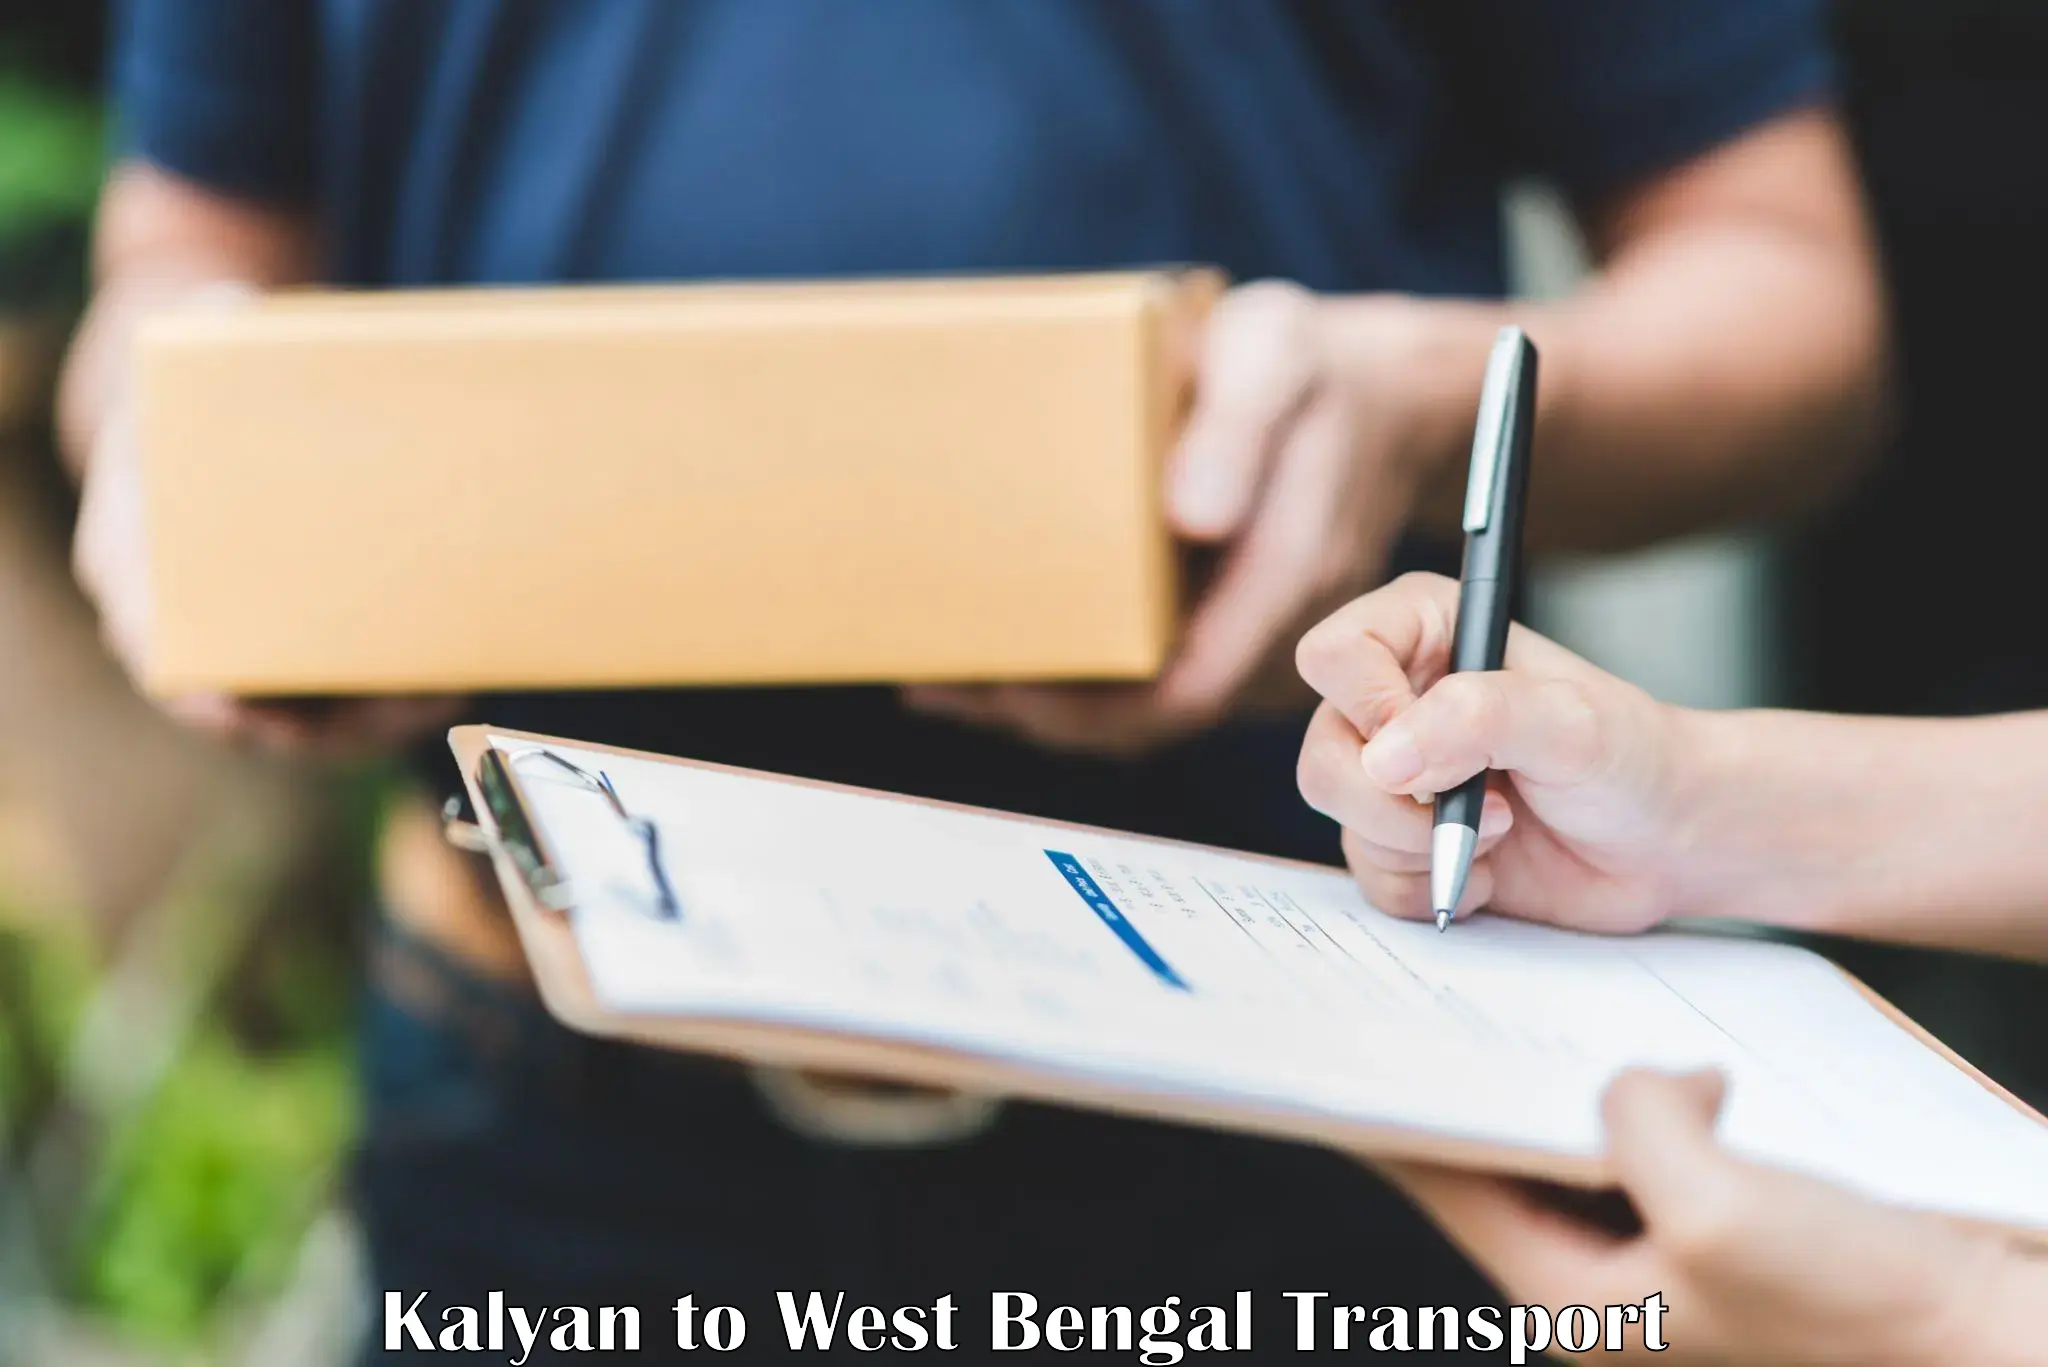 Container transport service Kalyan to Hooghly